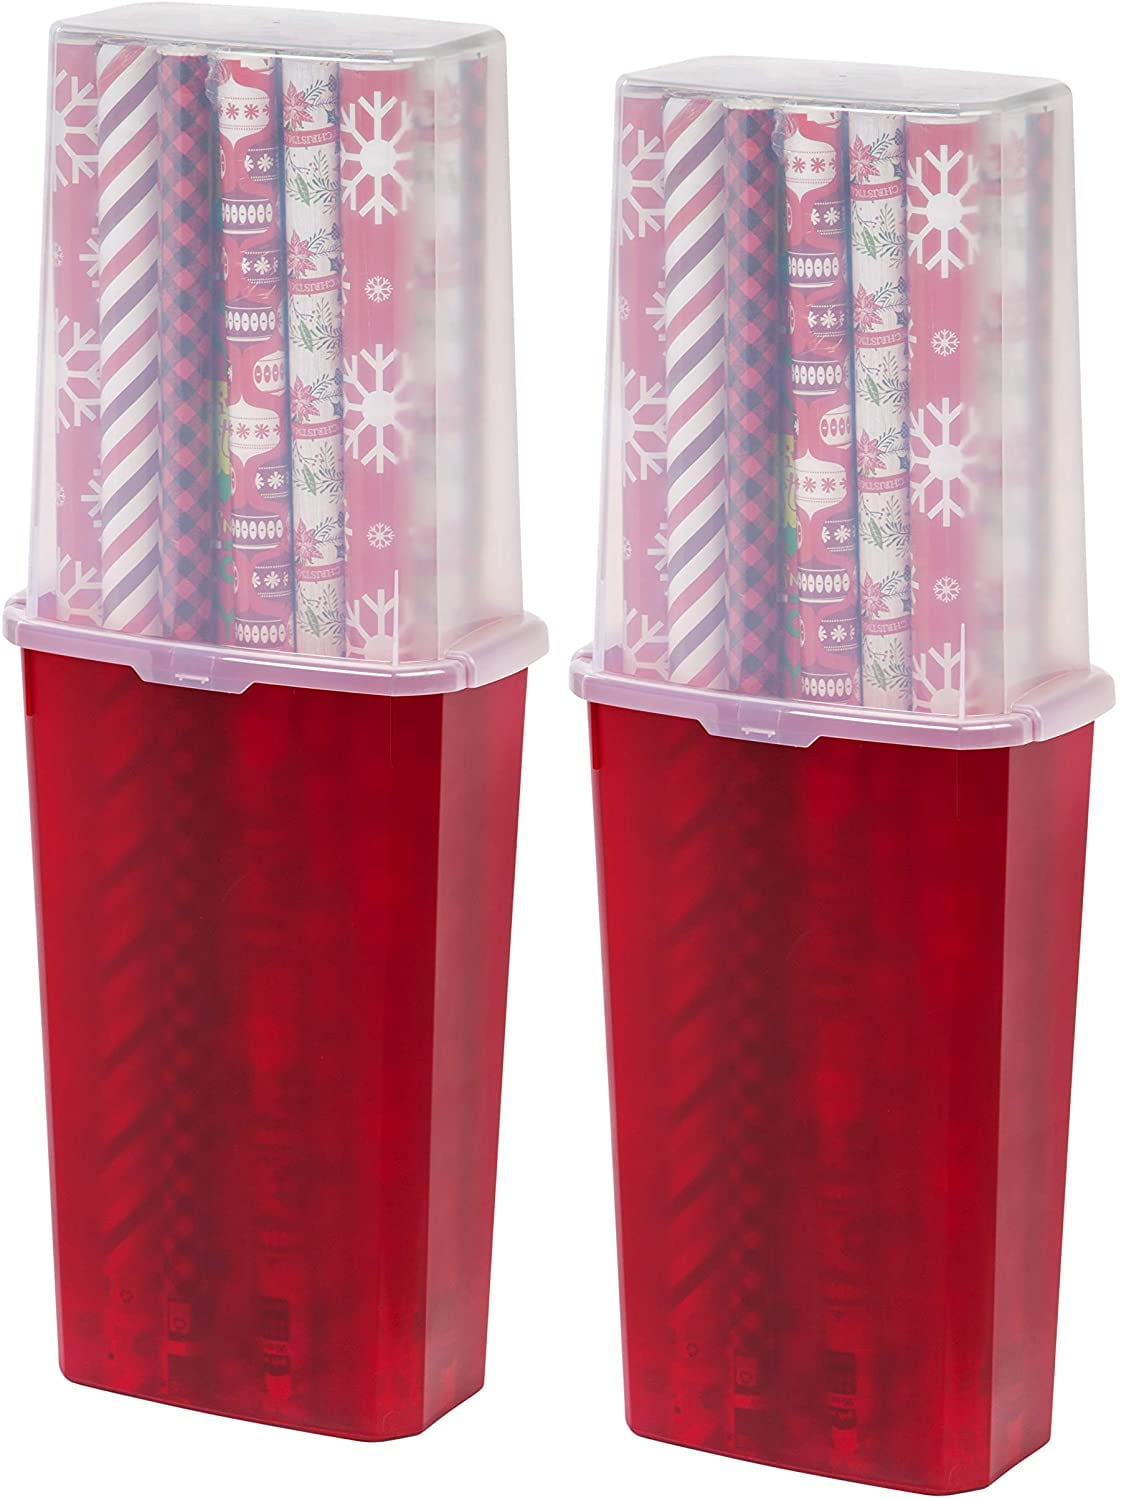 Paper Storage Box-Stores up to 20 Rolls of 30 Inch Long Gift Wrap in One  Convenient Red Lidded Container